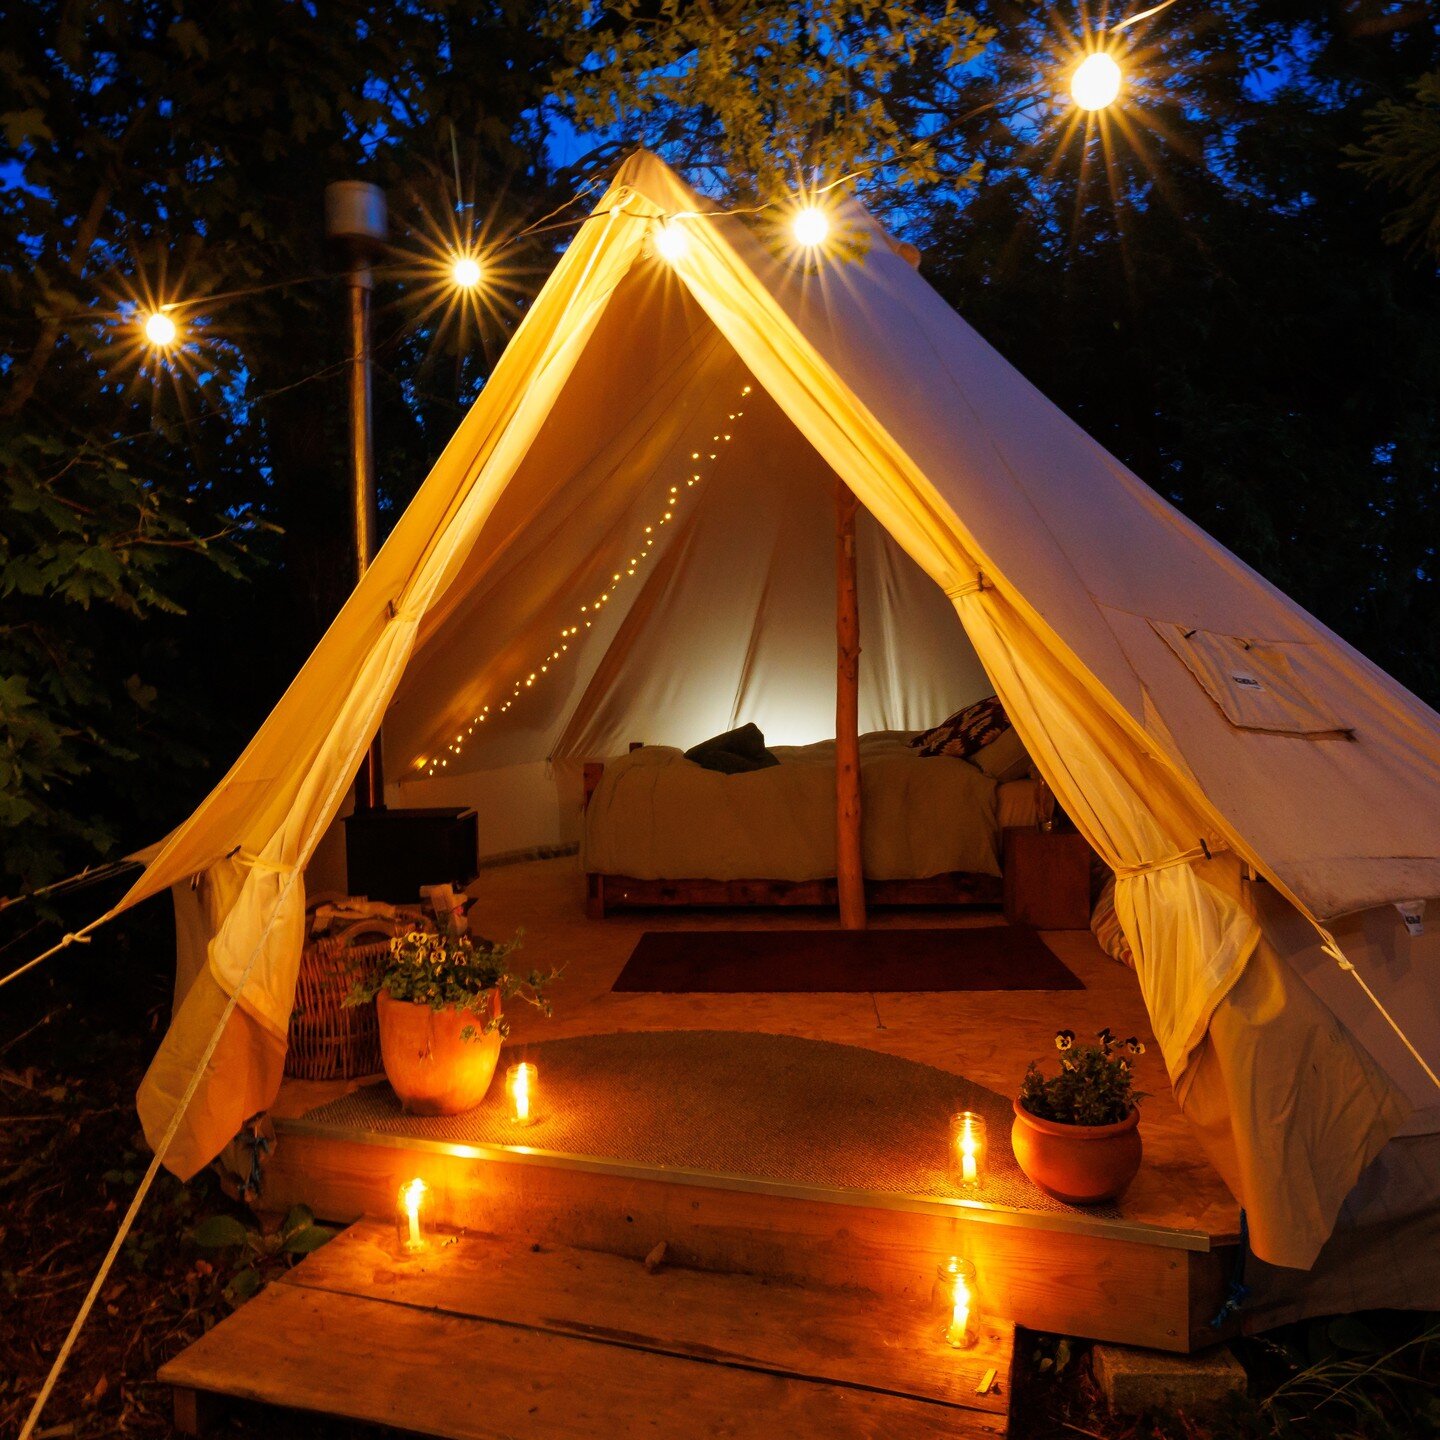 We'll be taking our bell tents down for the season at the end of the month, but we still have some availability throughout September.. and we've just reduced our prices :) Why not come stay with us on our permaculture homestead for a while and explor